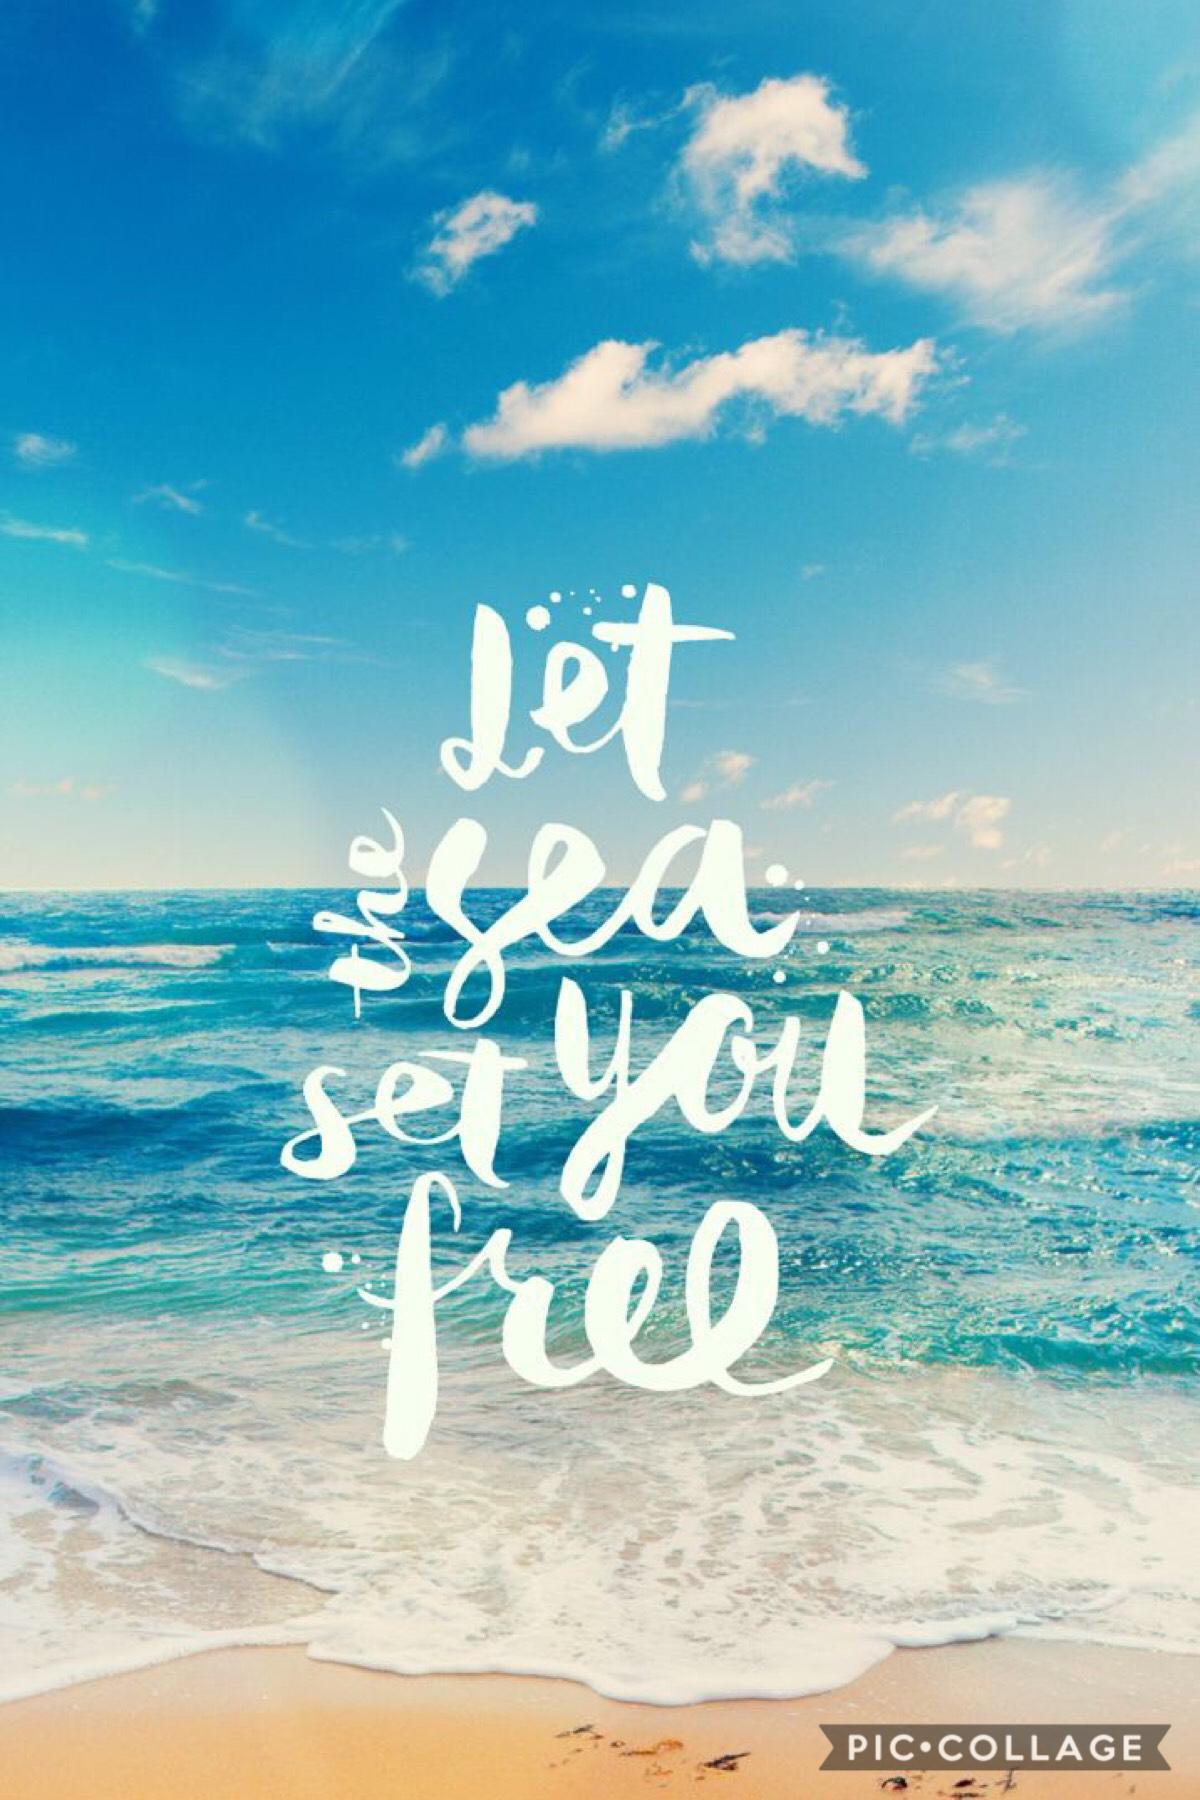 Let the sea set you free and tap the heart button